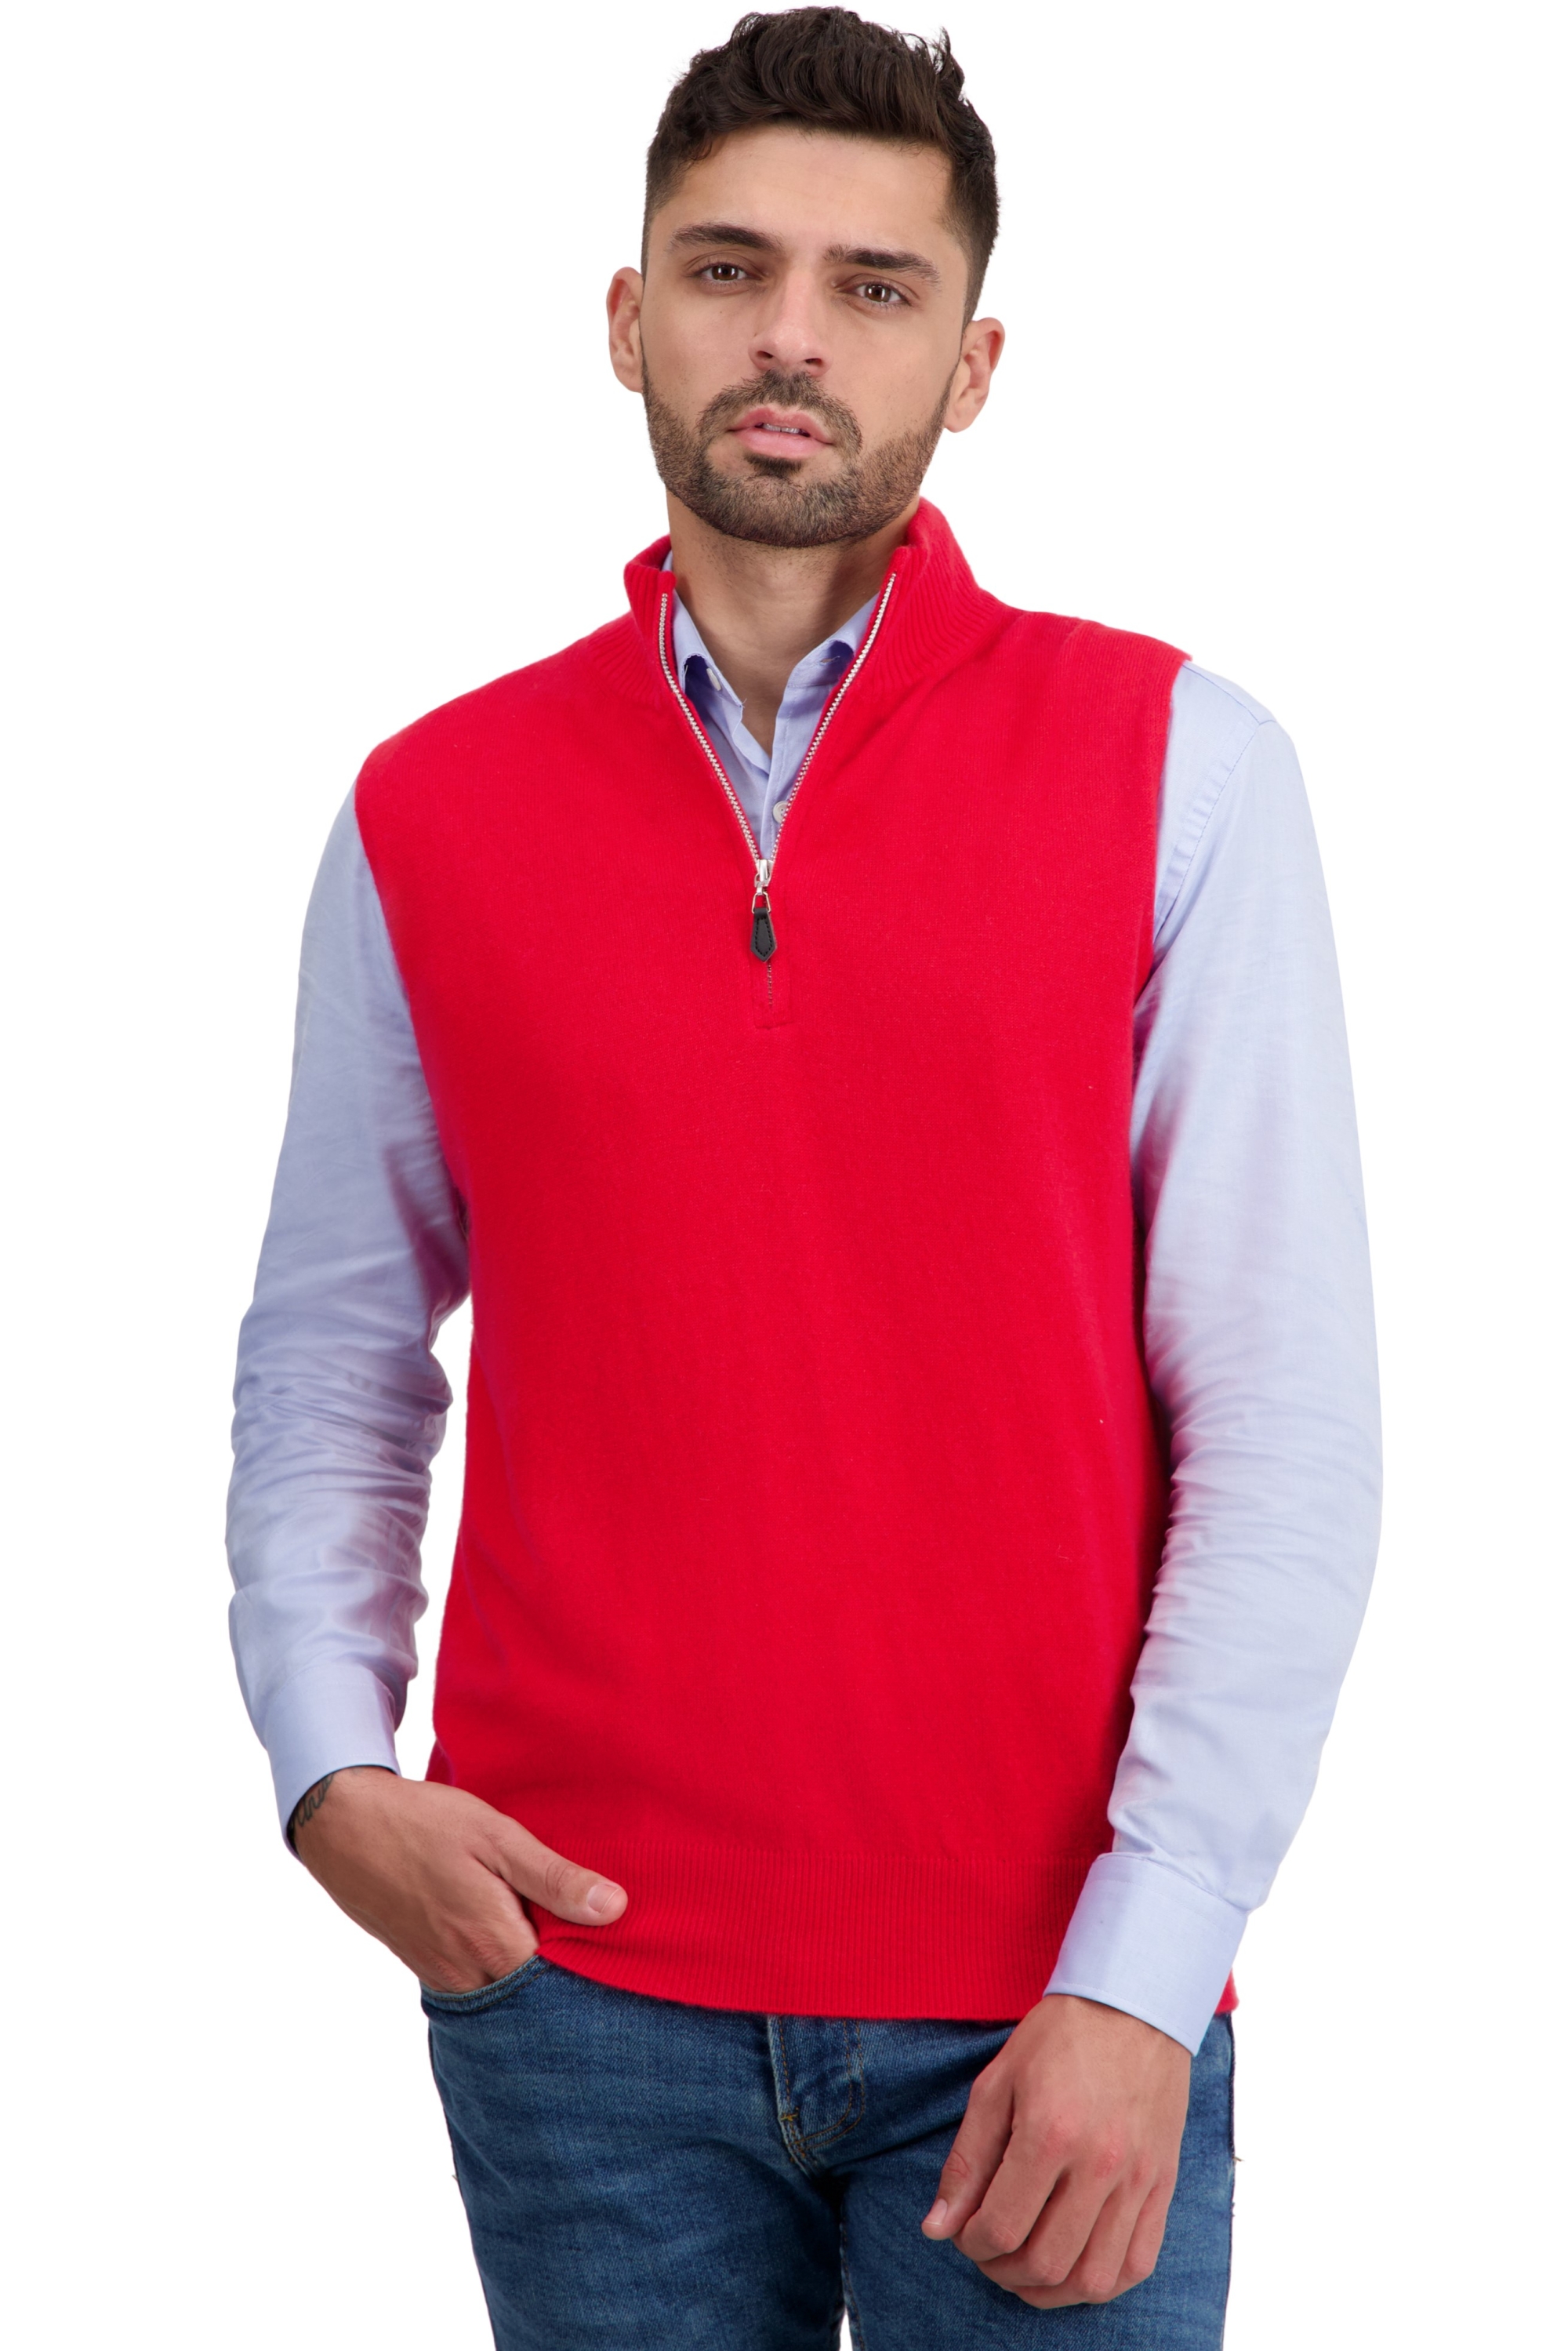 Cachemire pull homme texas rouge 3xl